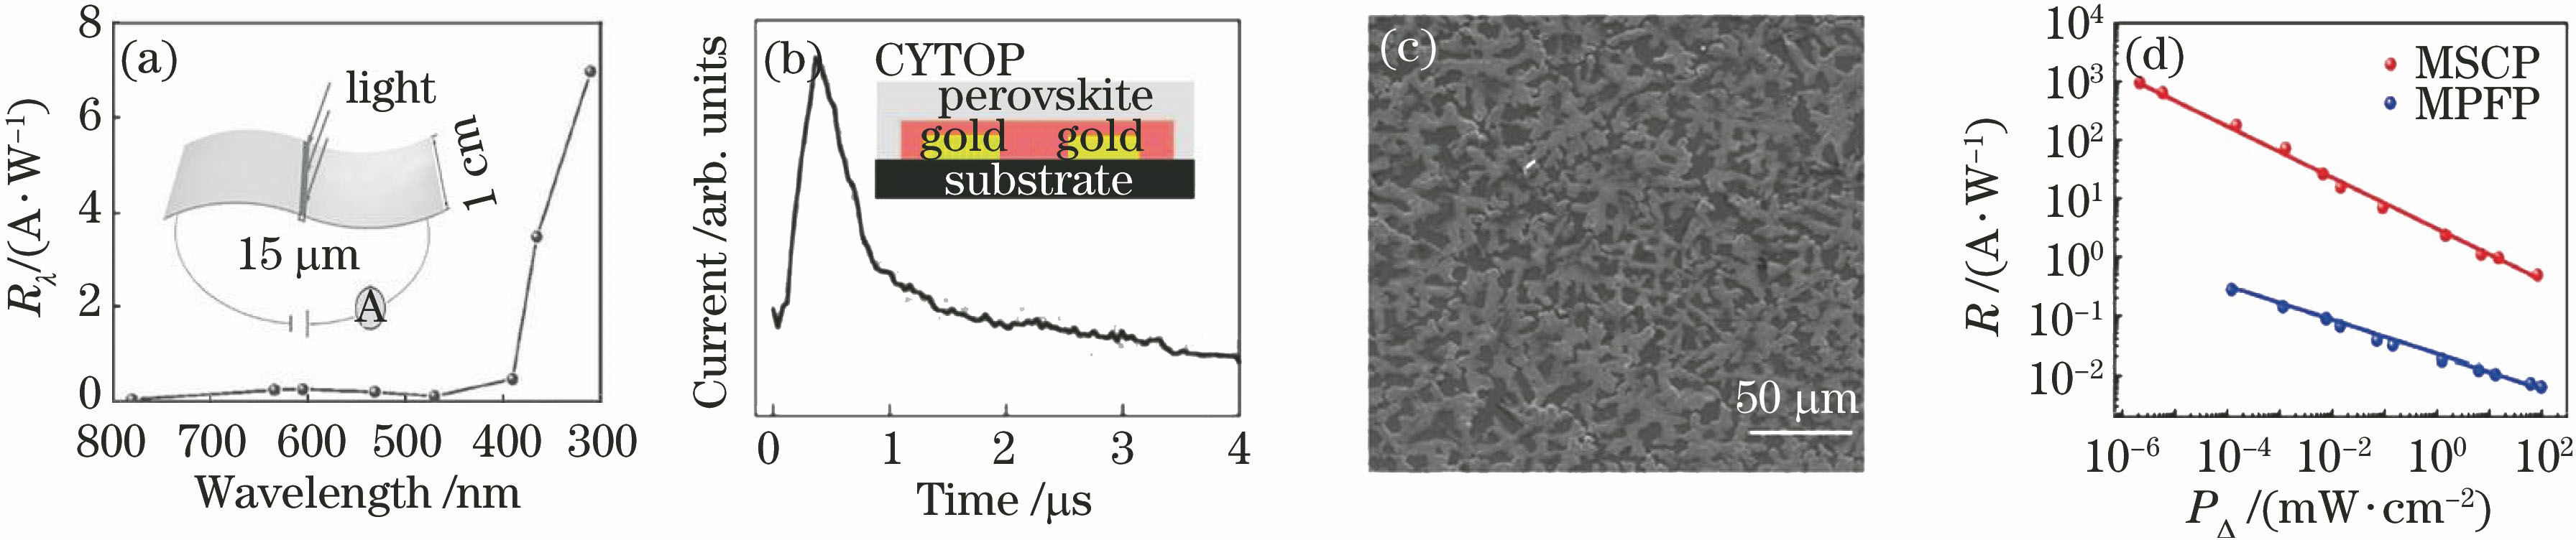 Structures and performances of photoconductive type perovskite photodetectors. (a) Device configuration (the inset) and the wavelength dependent responsivity for a MAPbI3 polycrystalline film photodetector[41]; (b) device configuration (the inset) and the transient response of a CYTOP-protected photodetector based on MAPbI3-xClx polycrystalline film[38]; (c) MAPbI3 polycrystalline film with island-structured morphology[50]; (d) comparison of irradiance power-dependent responsivity between a sing